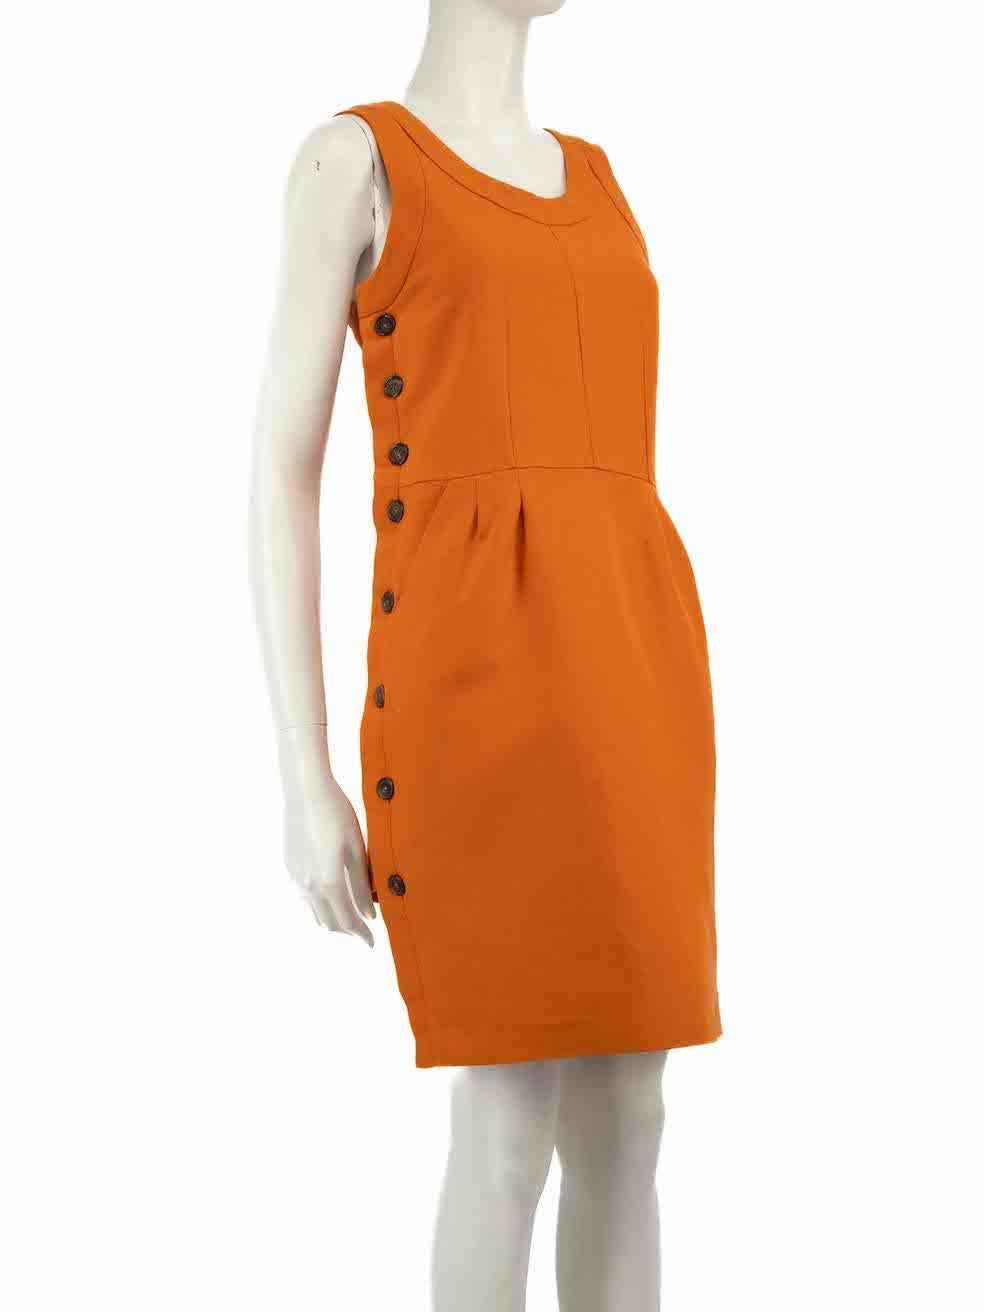 CONDITION is Very good. Hardly any visible wear to dress is evident on this used Marni designer resale item.
 
 
 
 Details
 
 
 Orange
 
 Cotton
 
 Knee length dress
 
 Sleeveless
 
 Round neckline
 
 Side button up closure
 
 2x Front side